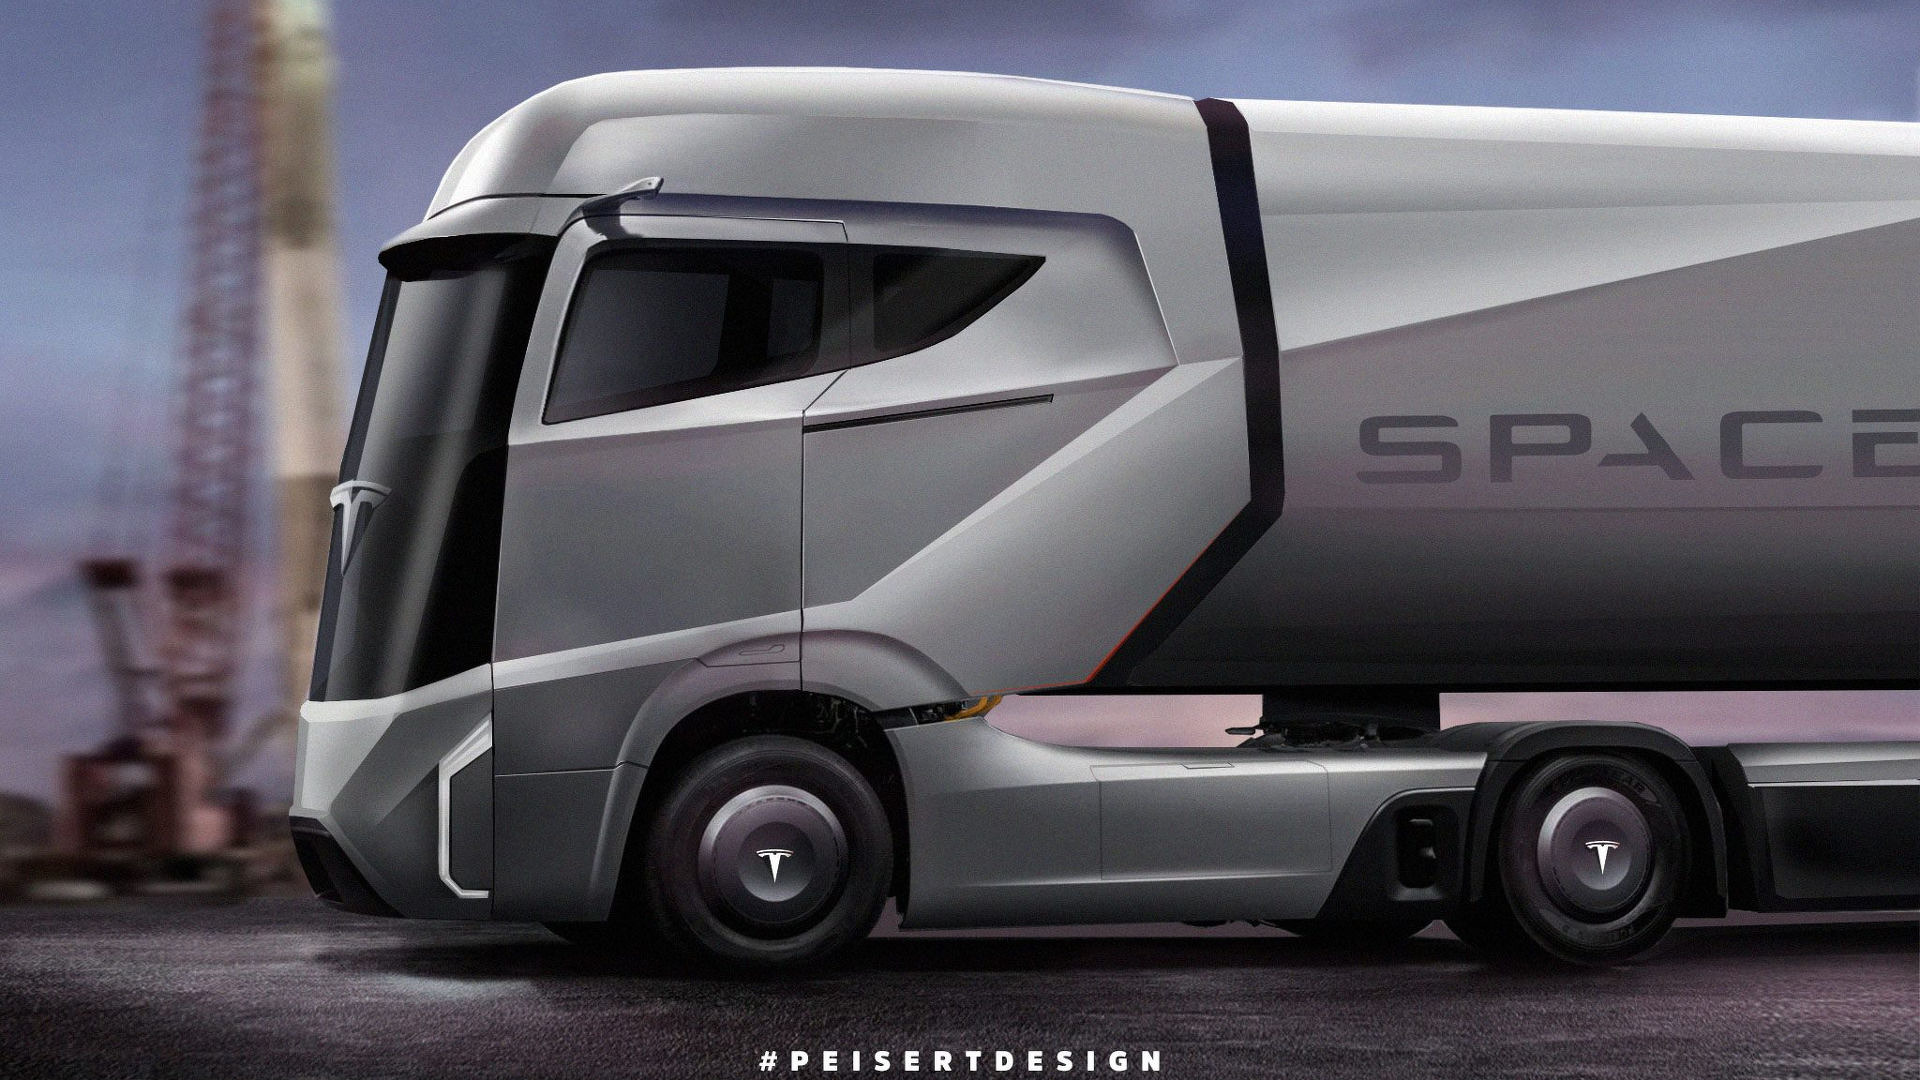 Tesla truck envisioned, Musk says “Model 3 is priority”